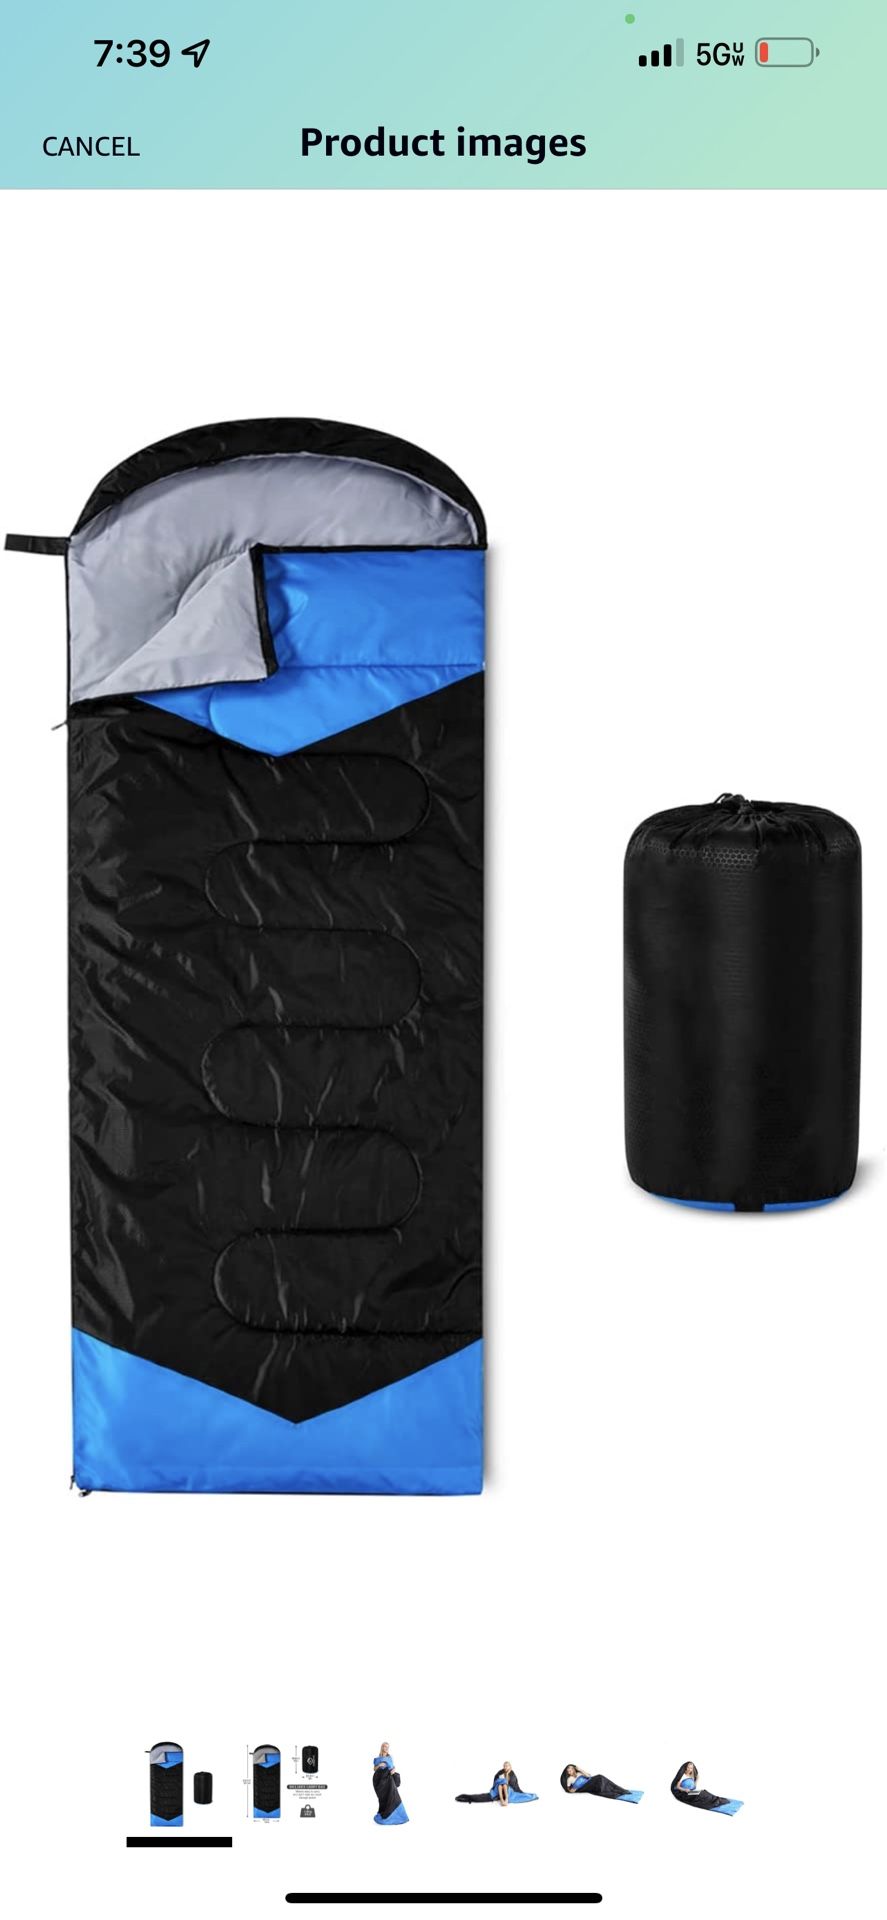 oaskys Camping Sleeping Bag - 3 Season Warm & Cool Weather - Summer, Spring, Fall, Lightweight, Waterproof for Adults & Kids - Camping Gear Equipment,